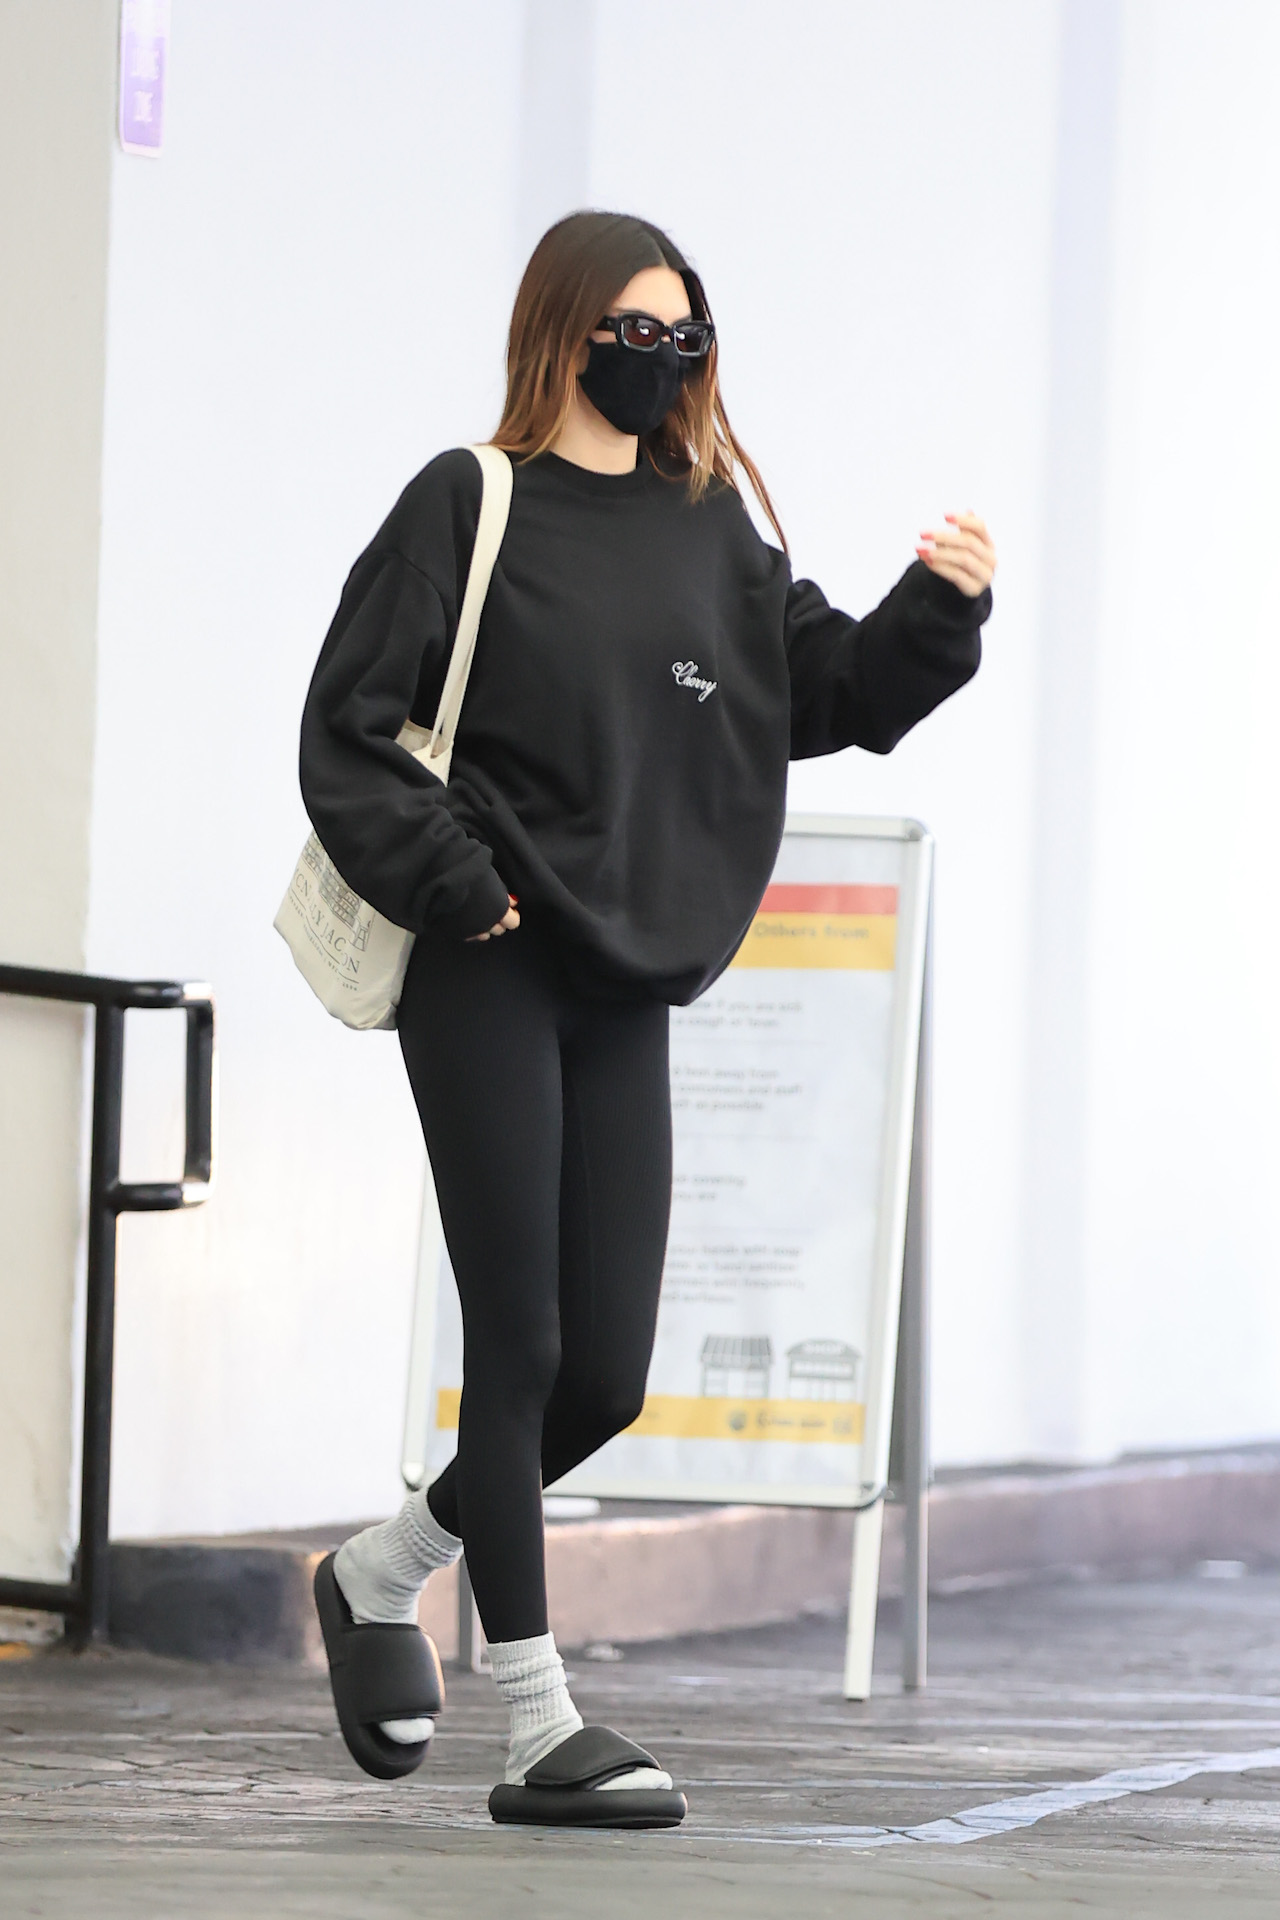 Kendall Jenner Black Crop Top and Leggings Outfit